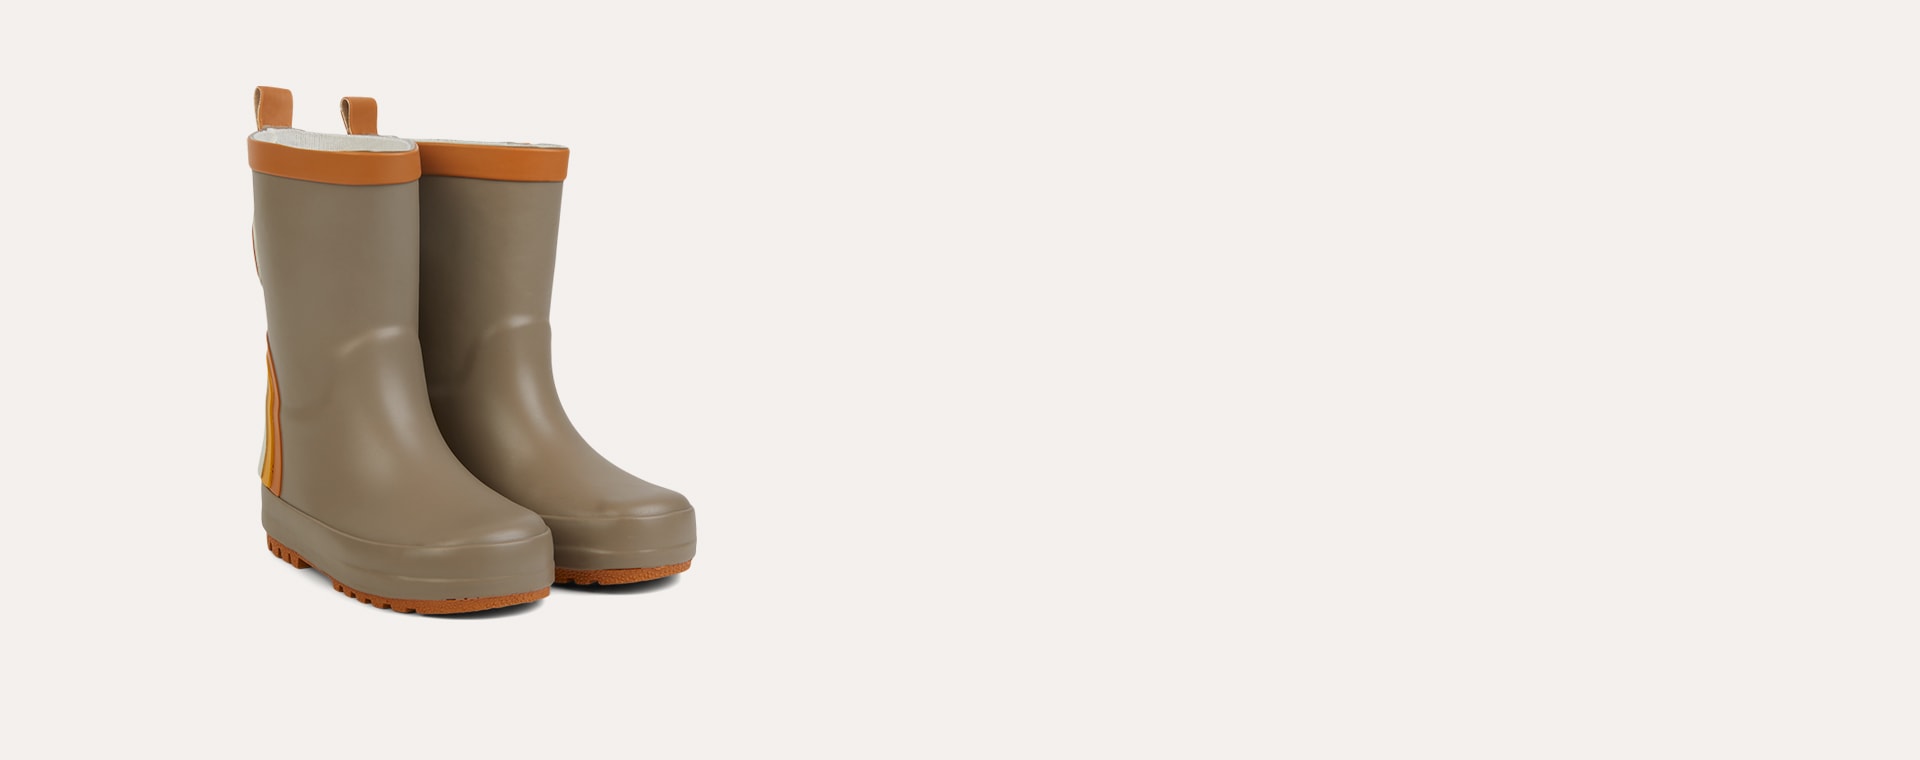 Rainbow-Stone Grech & Co Rubber Boots